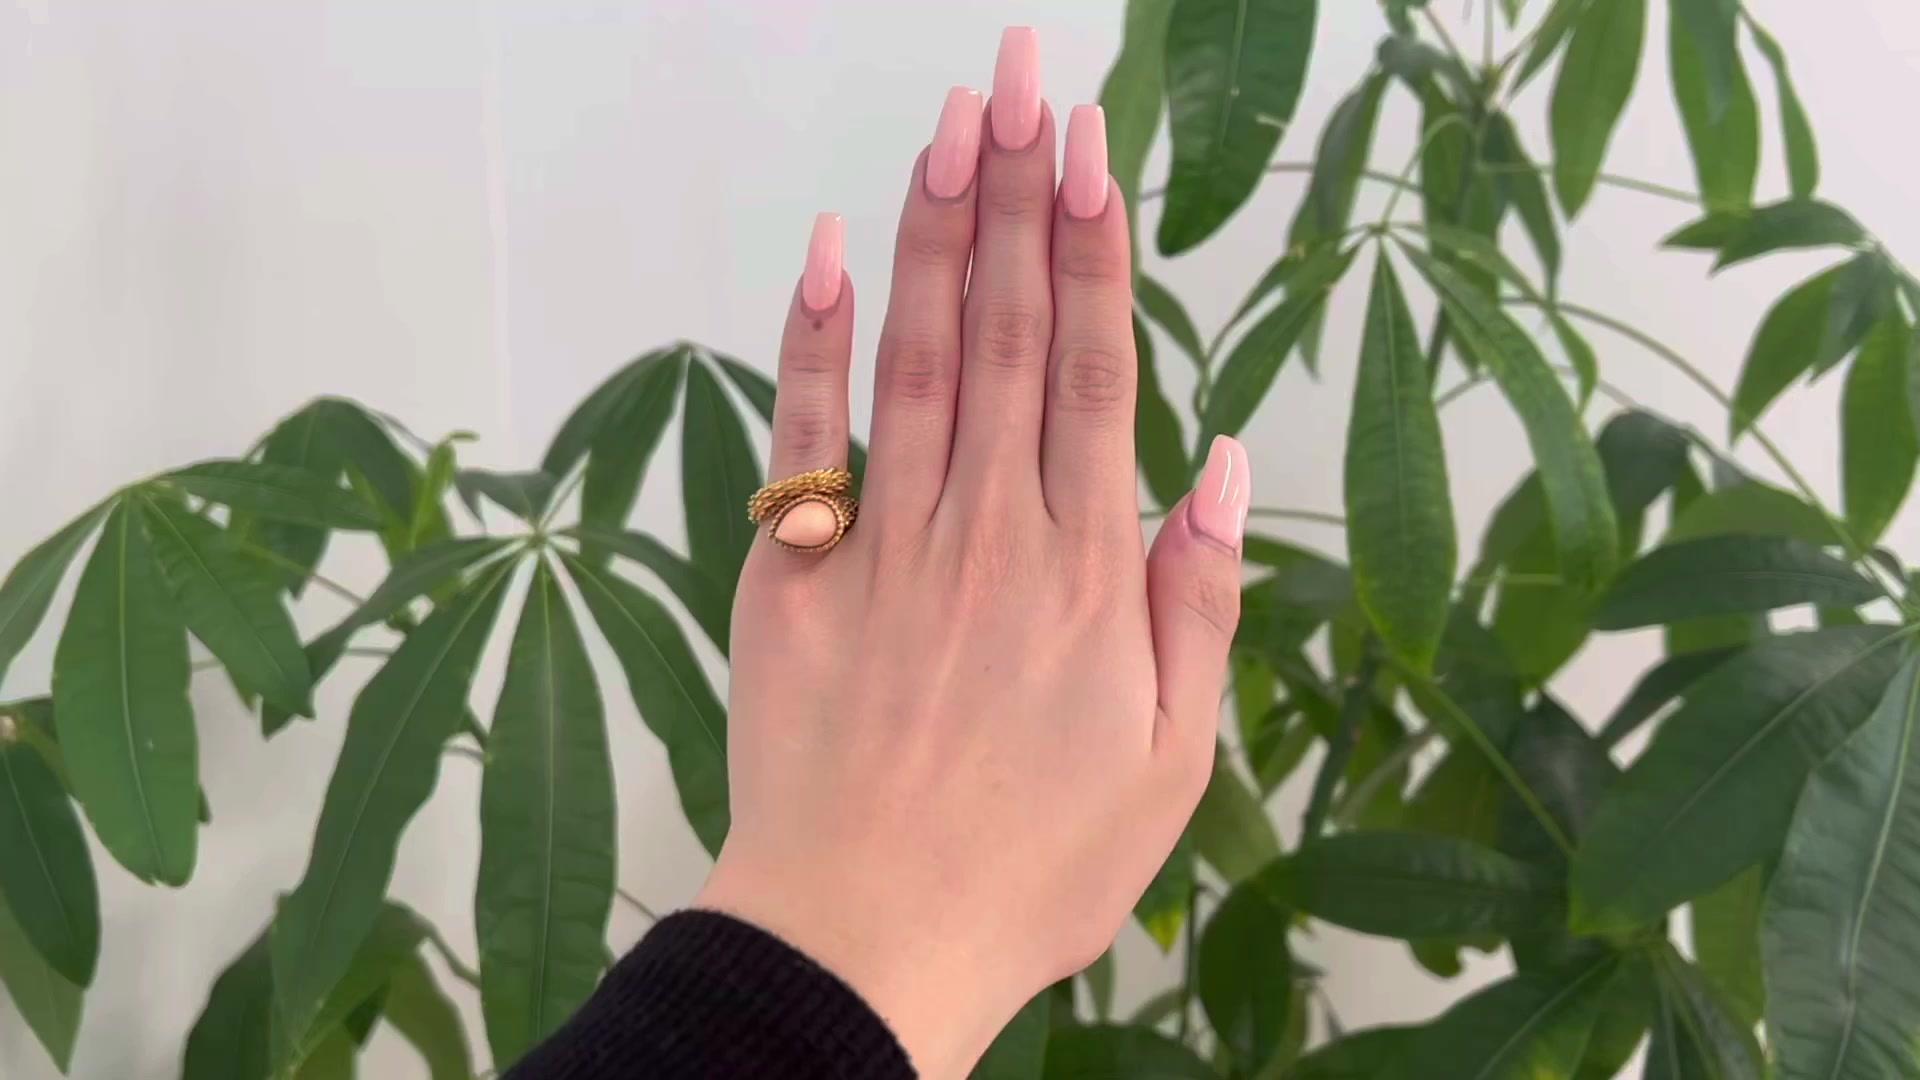 One Vintage Boucheron French Coral 18k Yellow Gold Serpent Boheme Ring. Featuring one cabochon cut coral. Crafted in 18 karat yellow gold signed Boucheron with French hallmarks. Circa 1970. The ring is a size 2 3/4.

About this Item: No collection